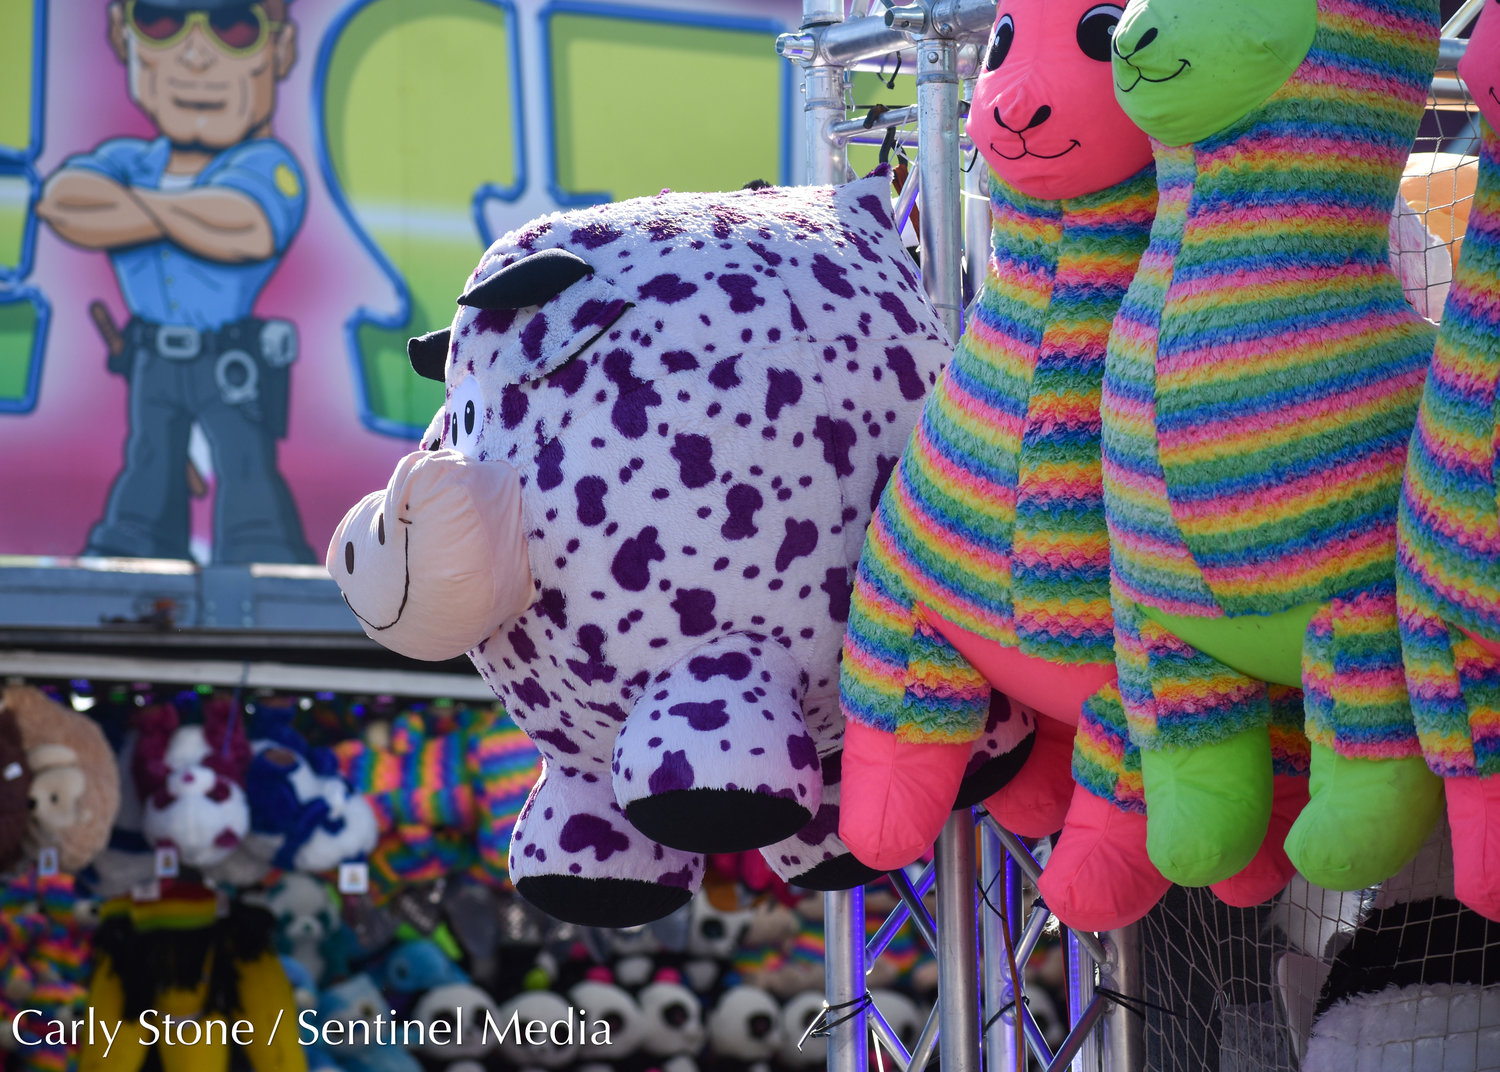 Large stuffed prizes weren't all too enticing — while the rides had lines, the gaming booths often did not.